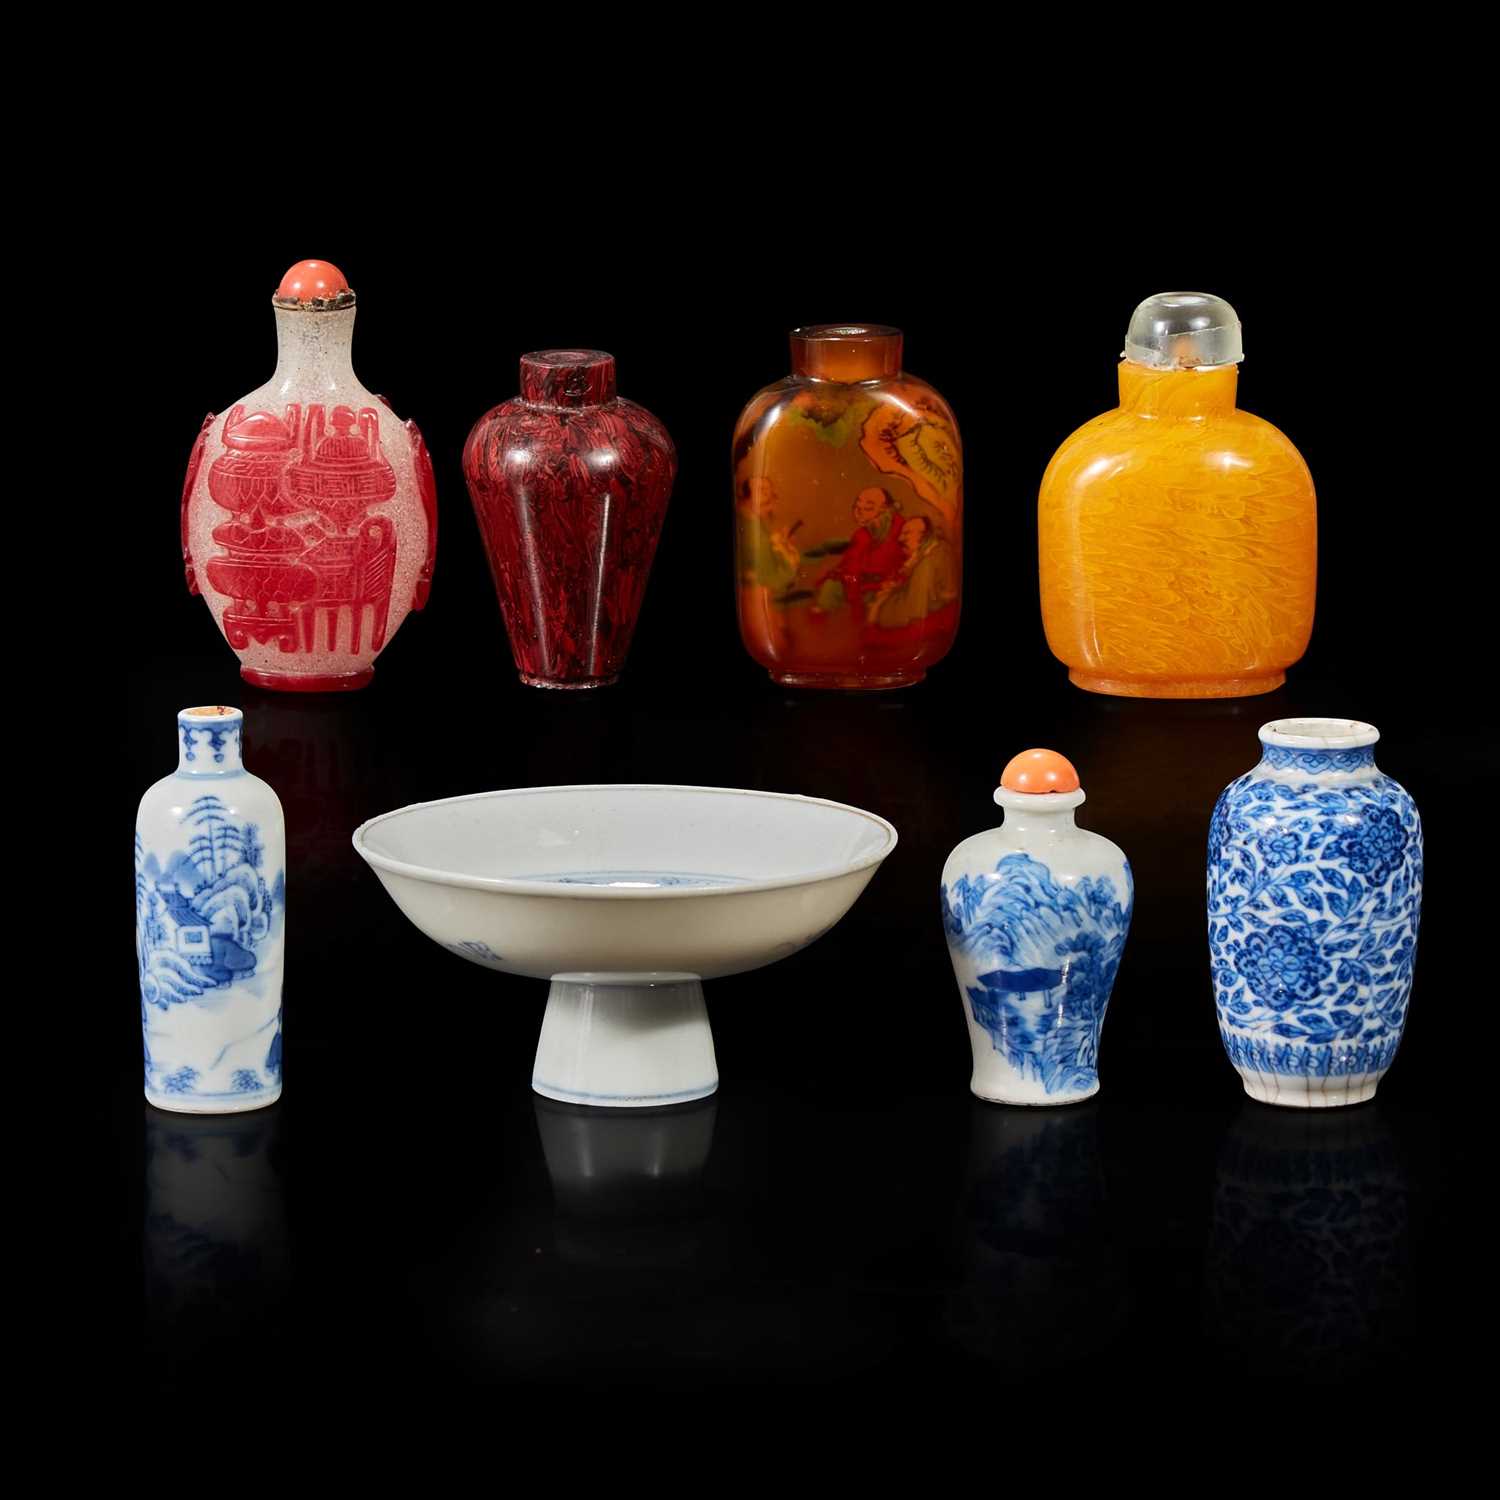 Lot 169 - Seven assorted glass, porcelain snuff bottles; a vase; and a small blue and white porcelain tazza